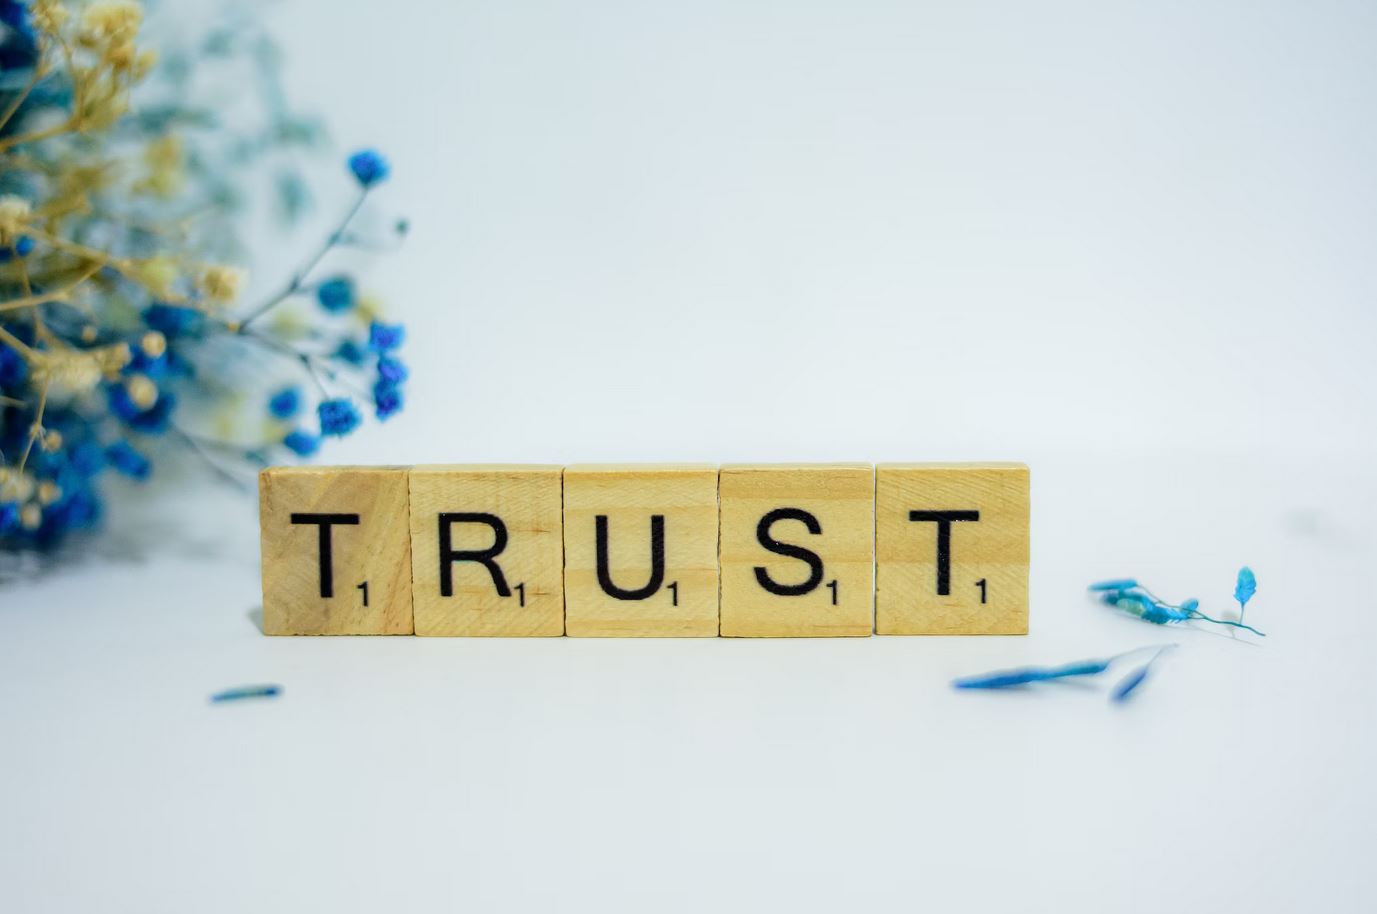 Actions build trust over time